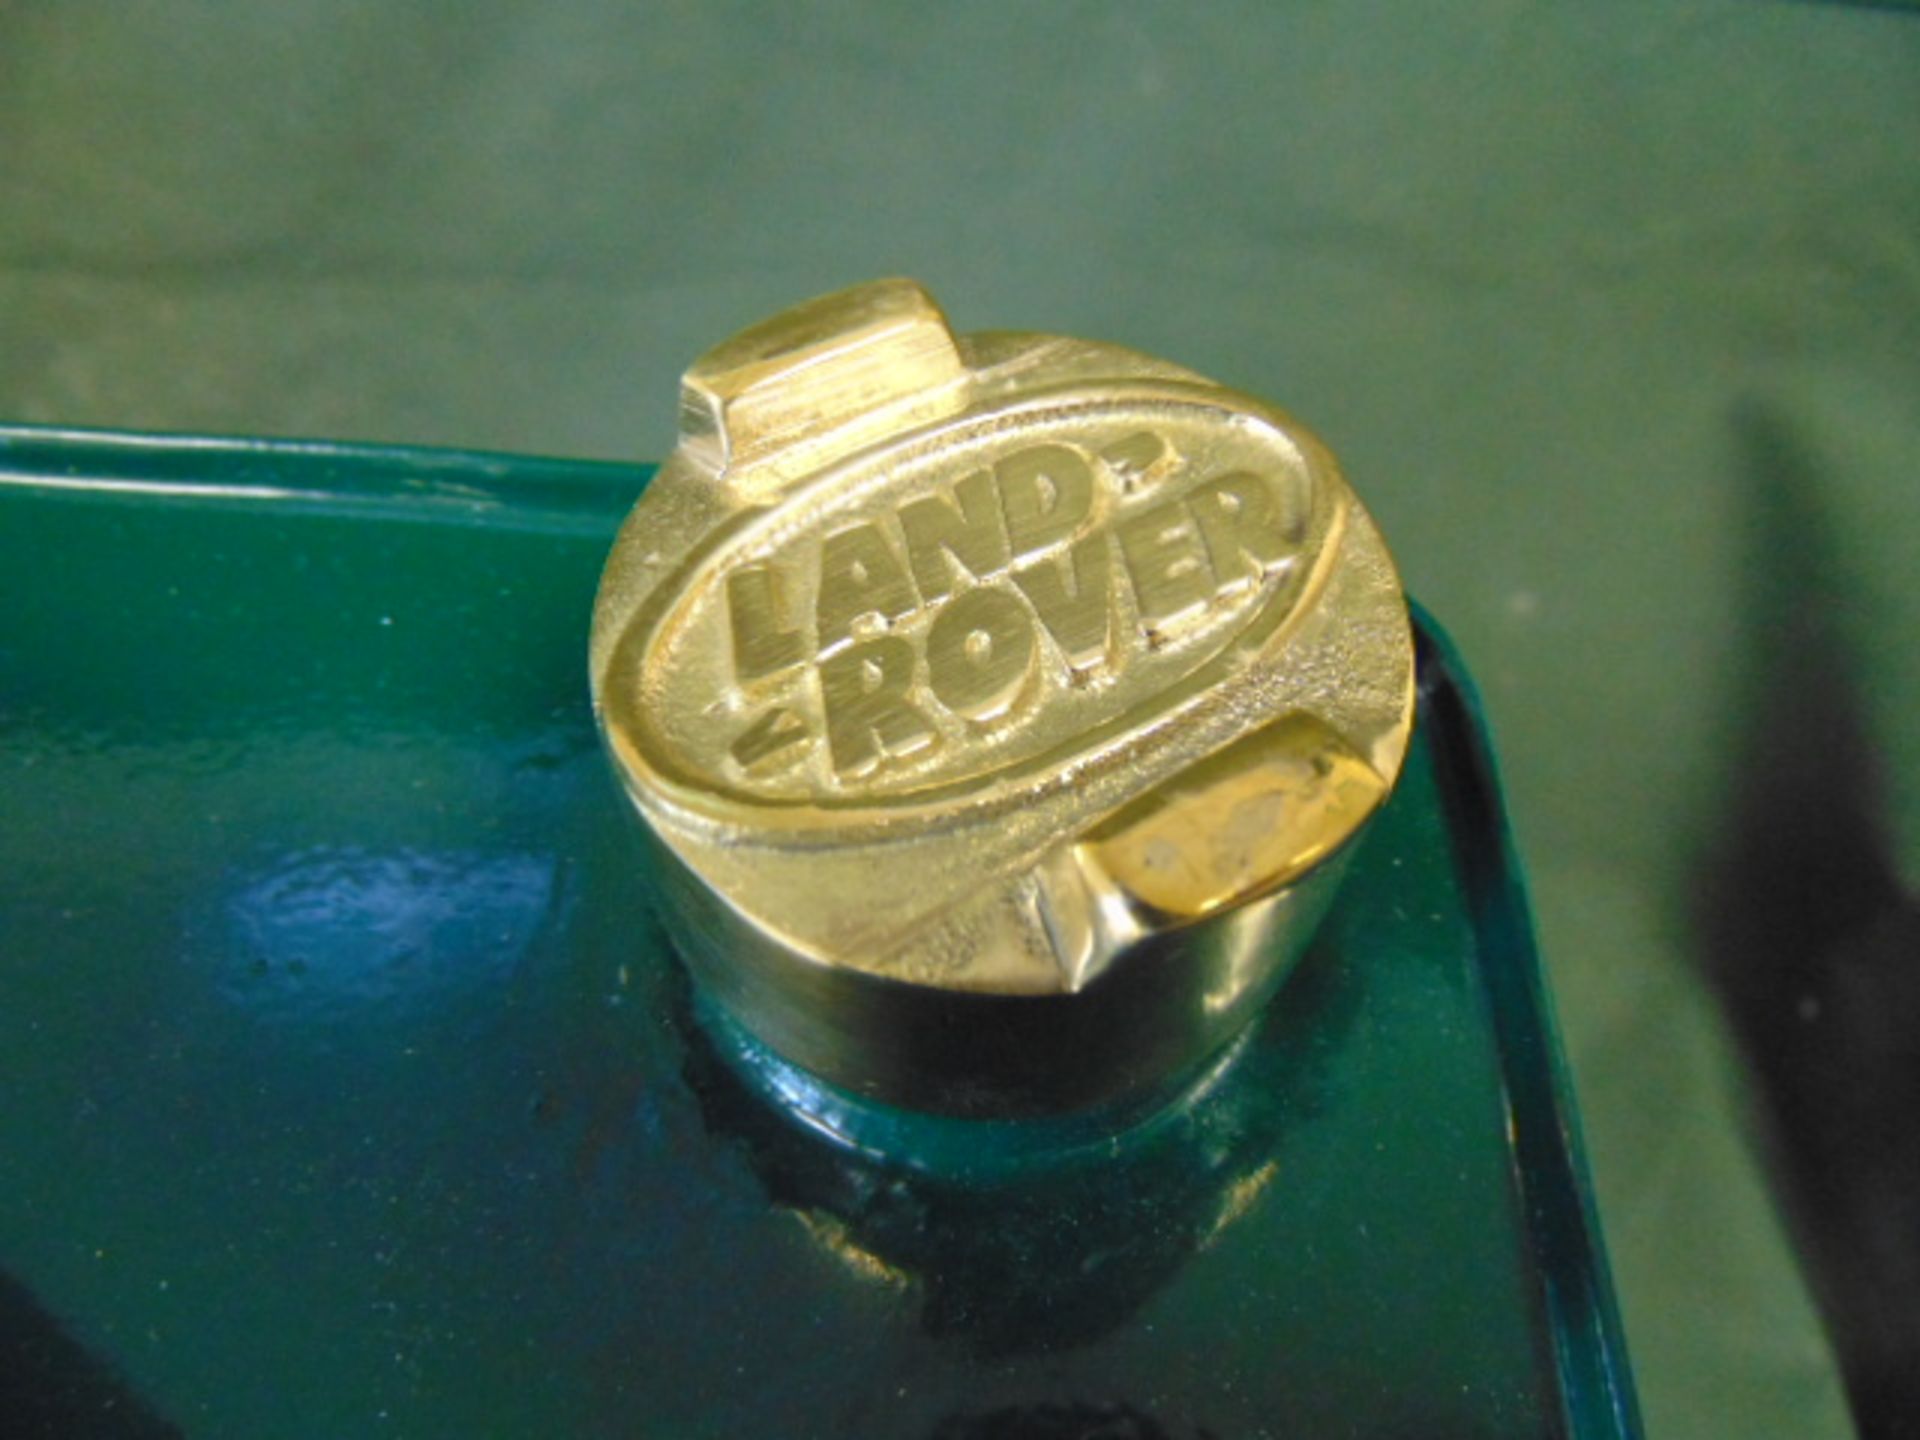 Reproduction Land Rover Branded Oil Can - Image 4 of 4